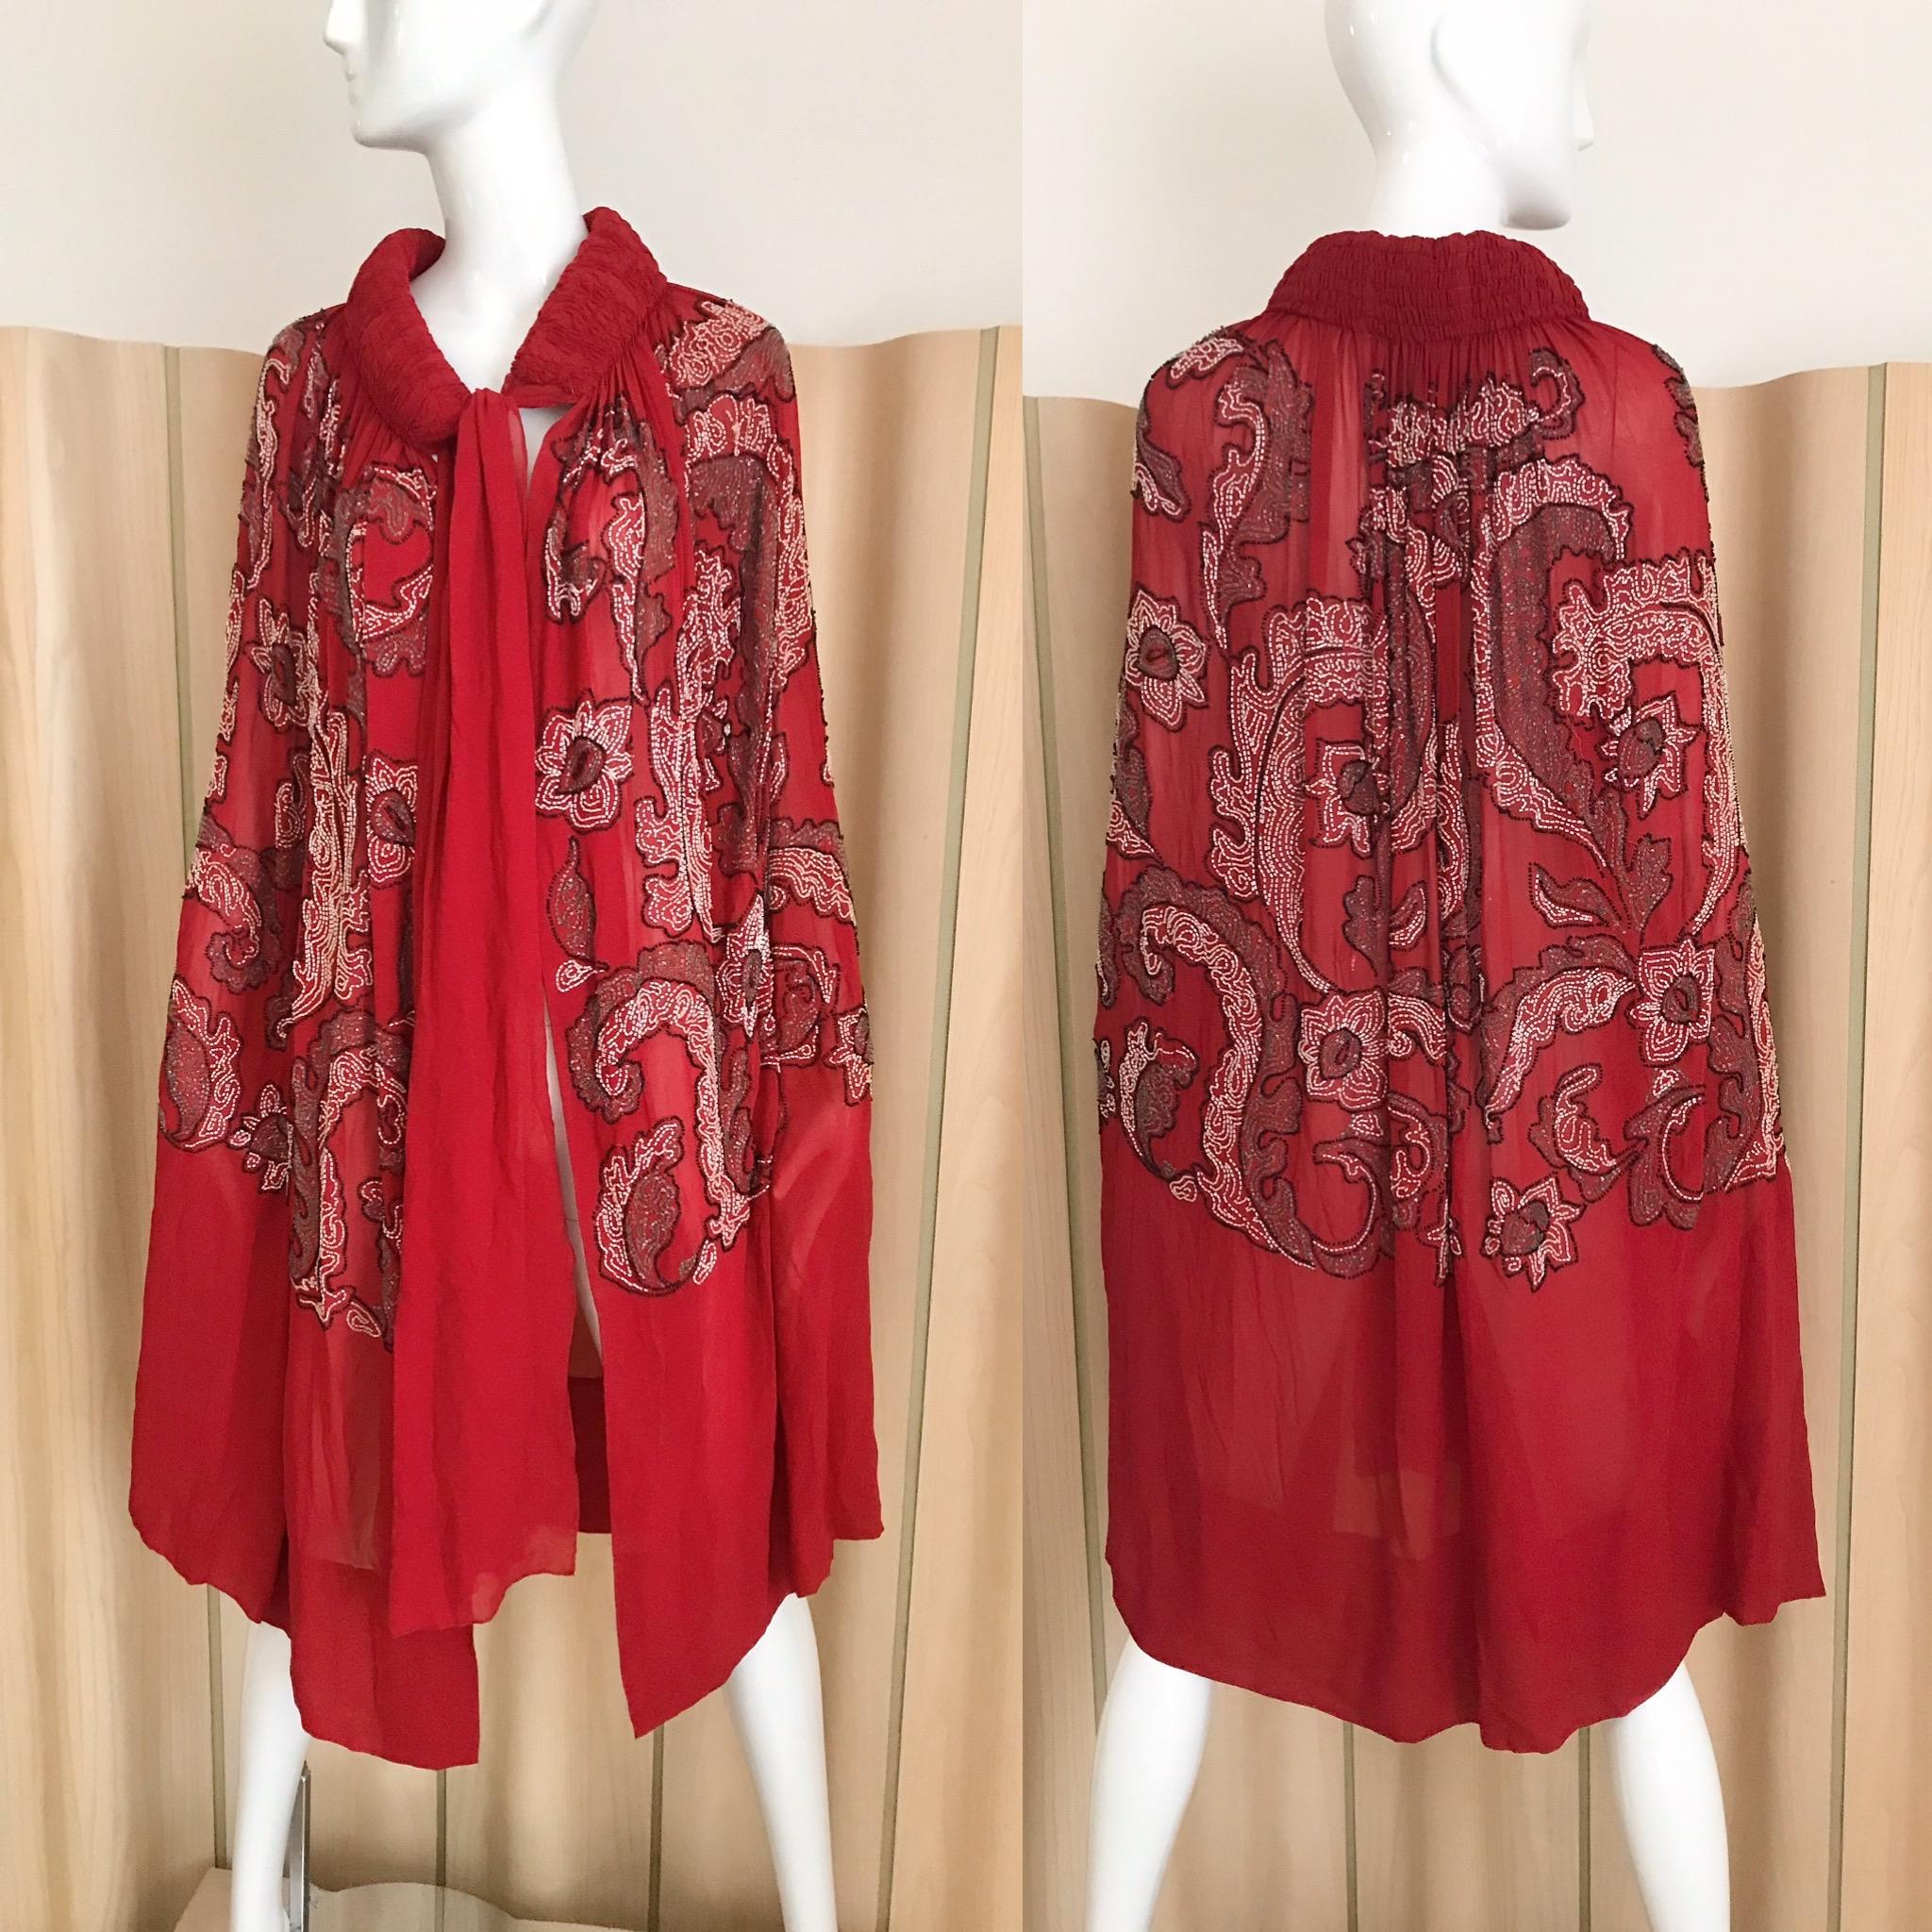 1920s Berry Red Made in France Silk Beaded Cape.
Fit all Size